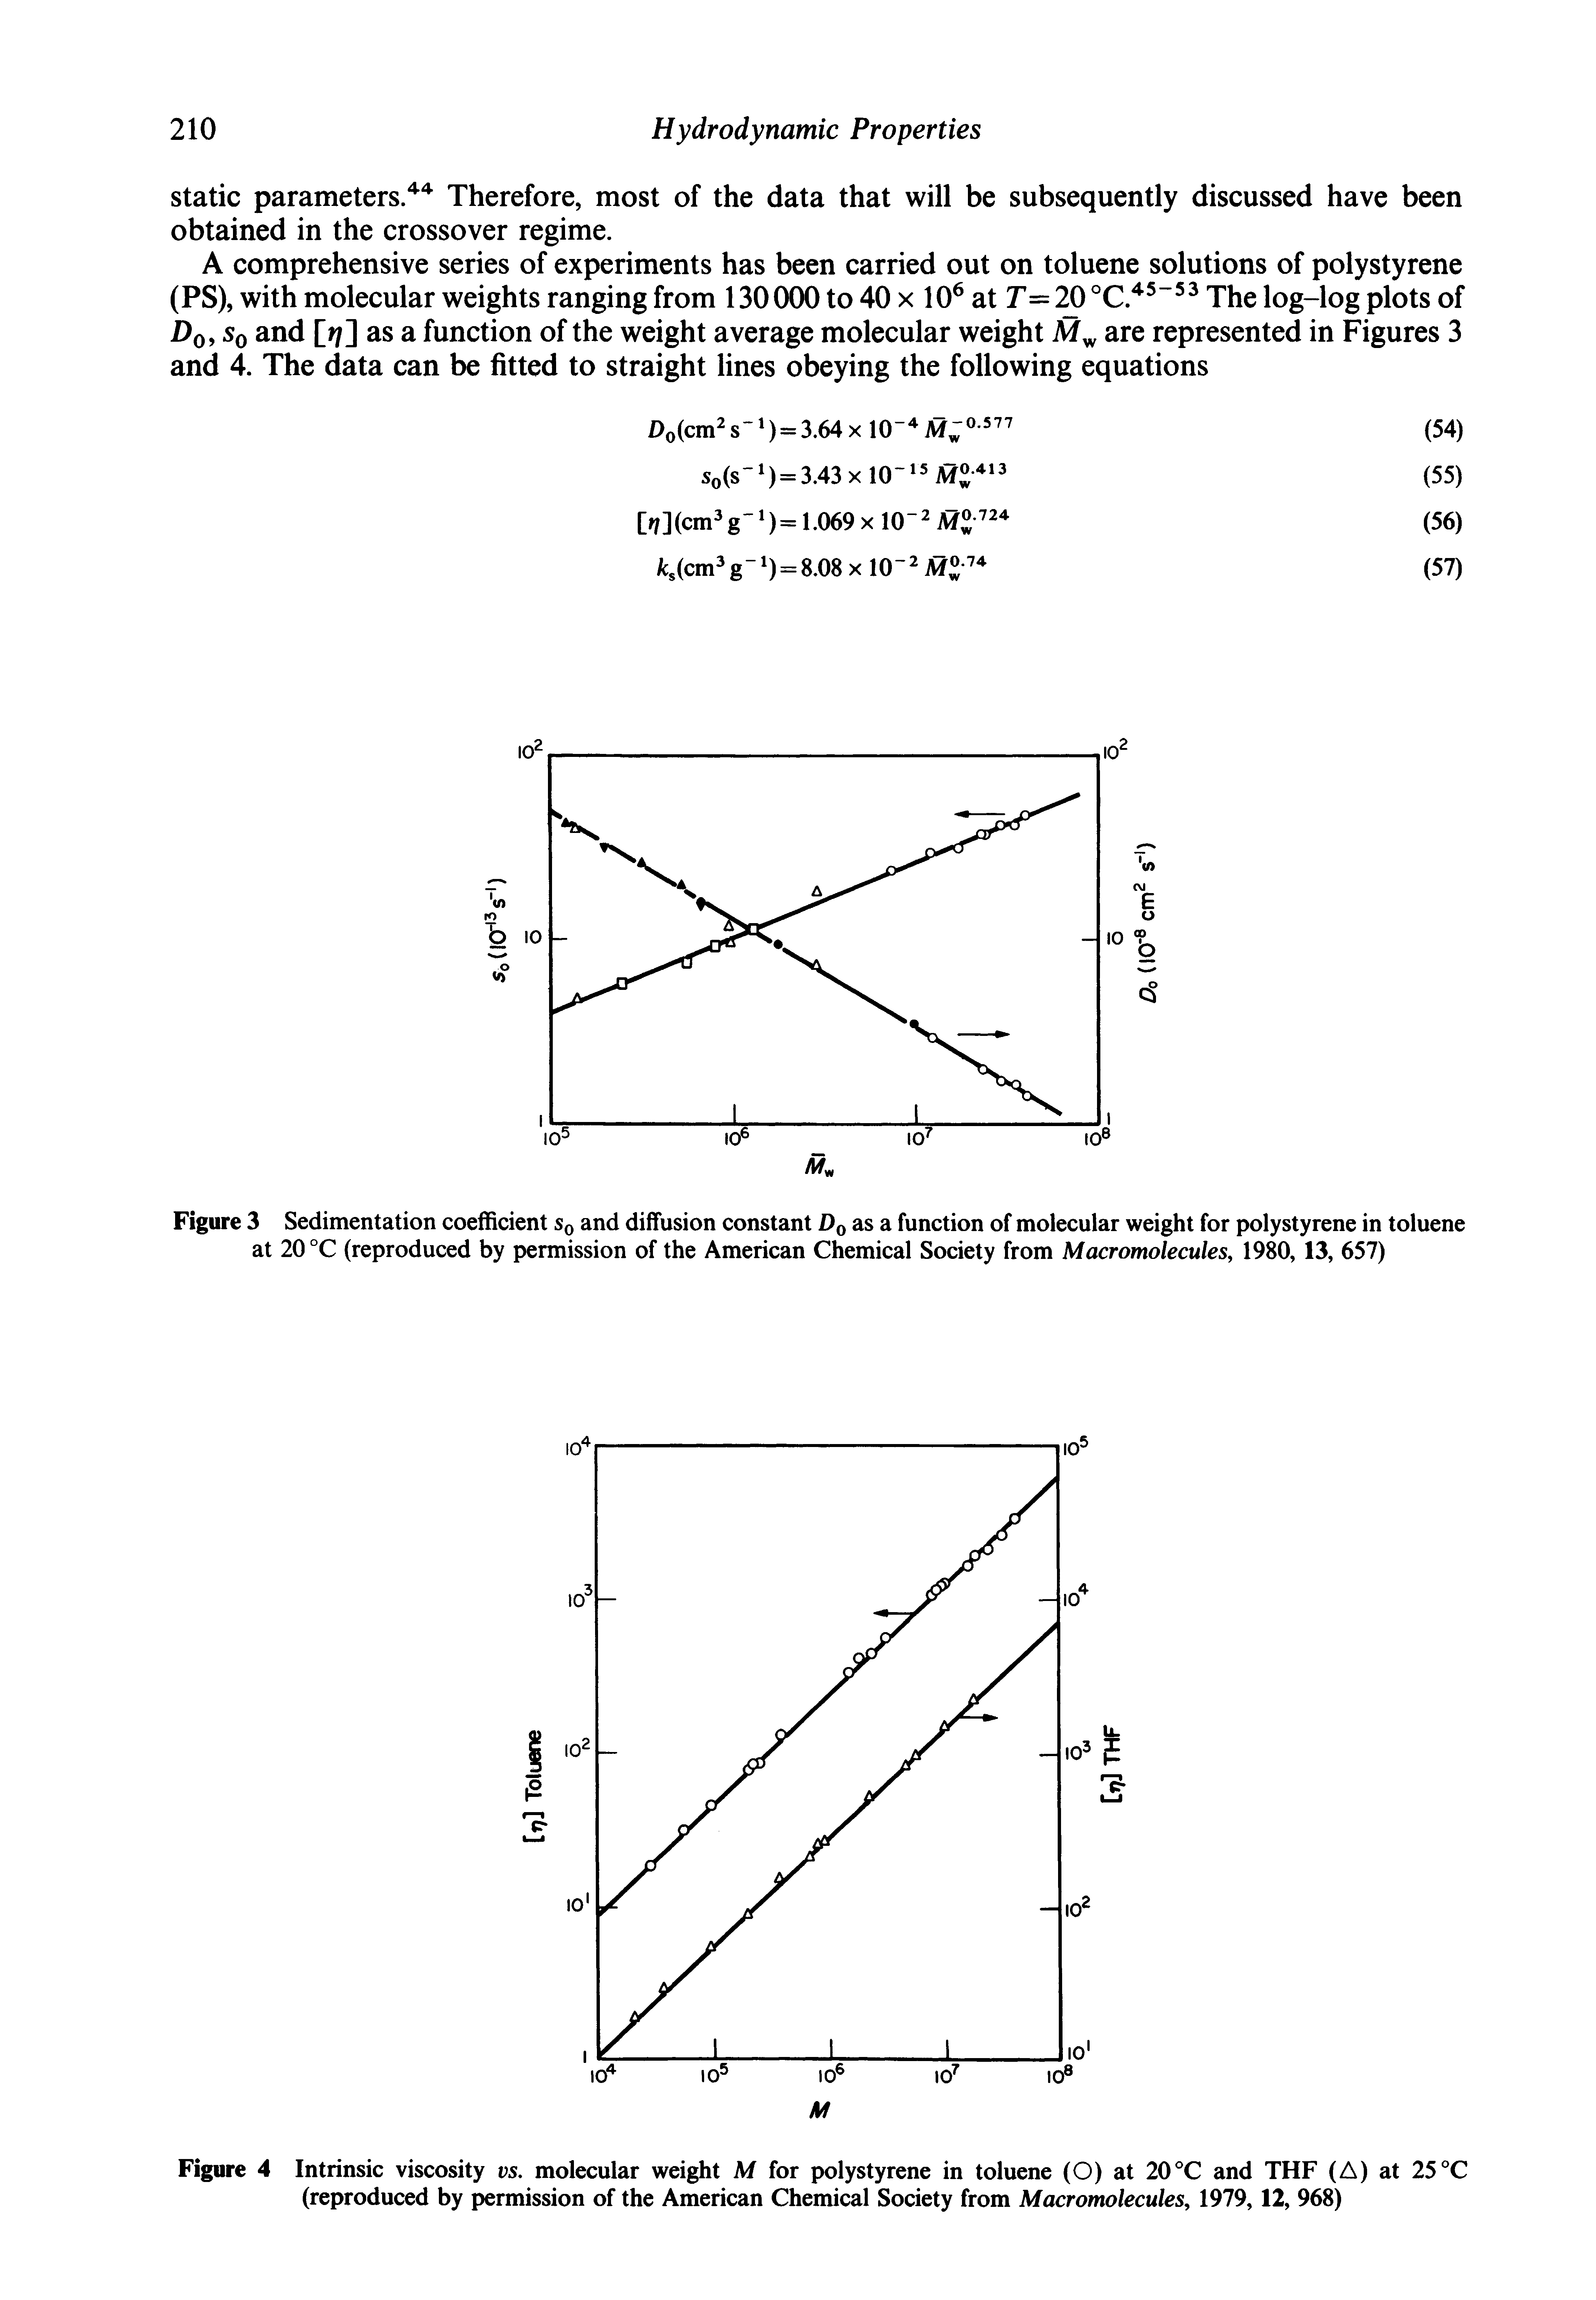 Figure 4 Intrinsic viscosity vs. molecular weight M for polystyrene in toluene (O) at 2CC and THF (A) at 25 °C (reproduced by permission of the American Chemical Society from Macromolecules, 1979, 12, 968)...